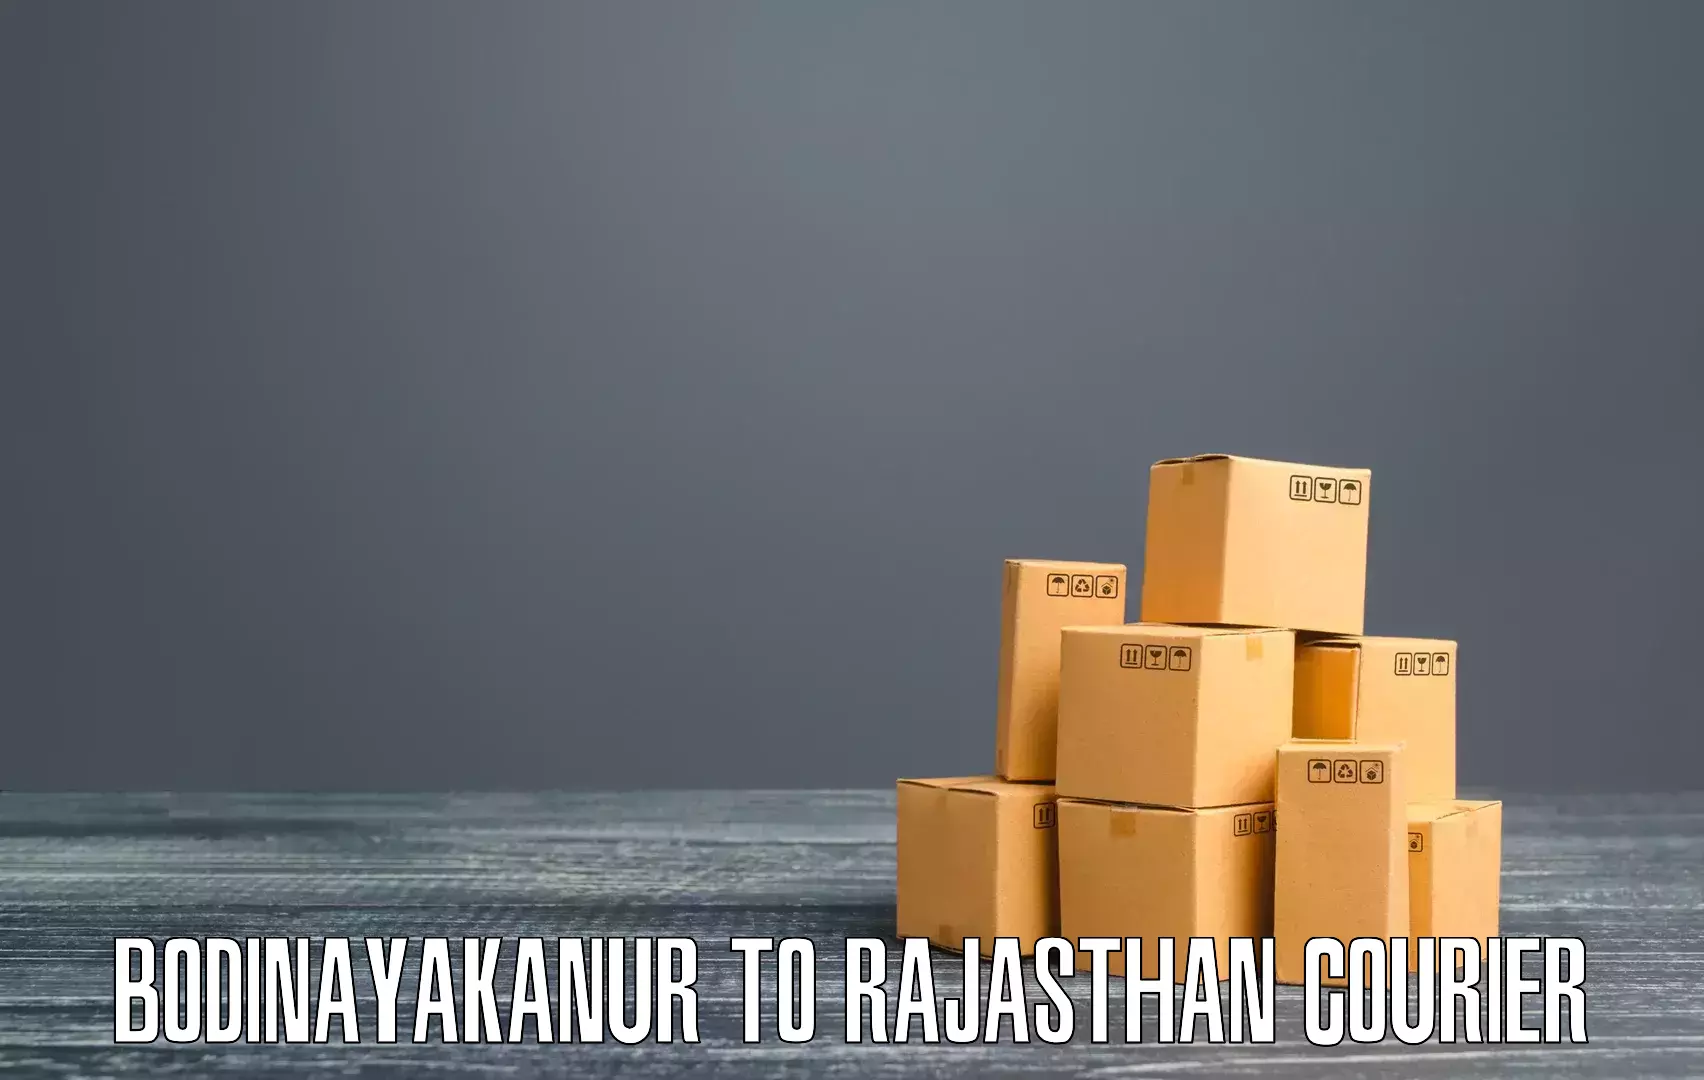 Commercial shipping rates Bodinayakanur to Rajasthan